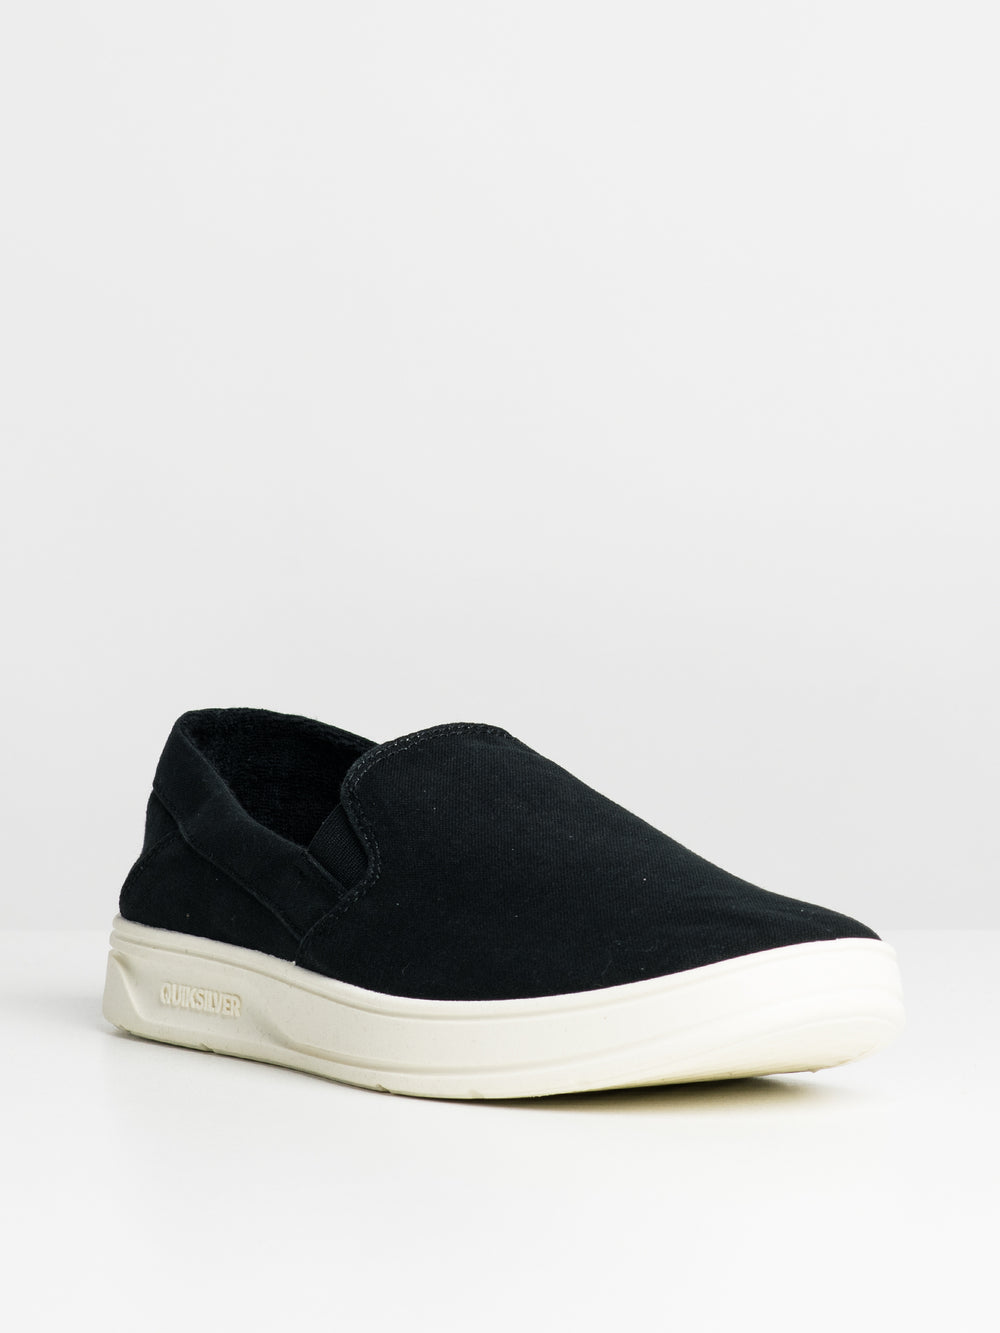 QUIKSILVER HARBOR WHARF SLIP ON MENS - CLEARANCE